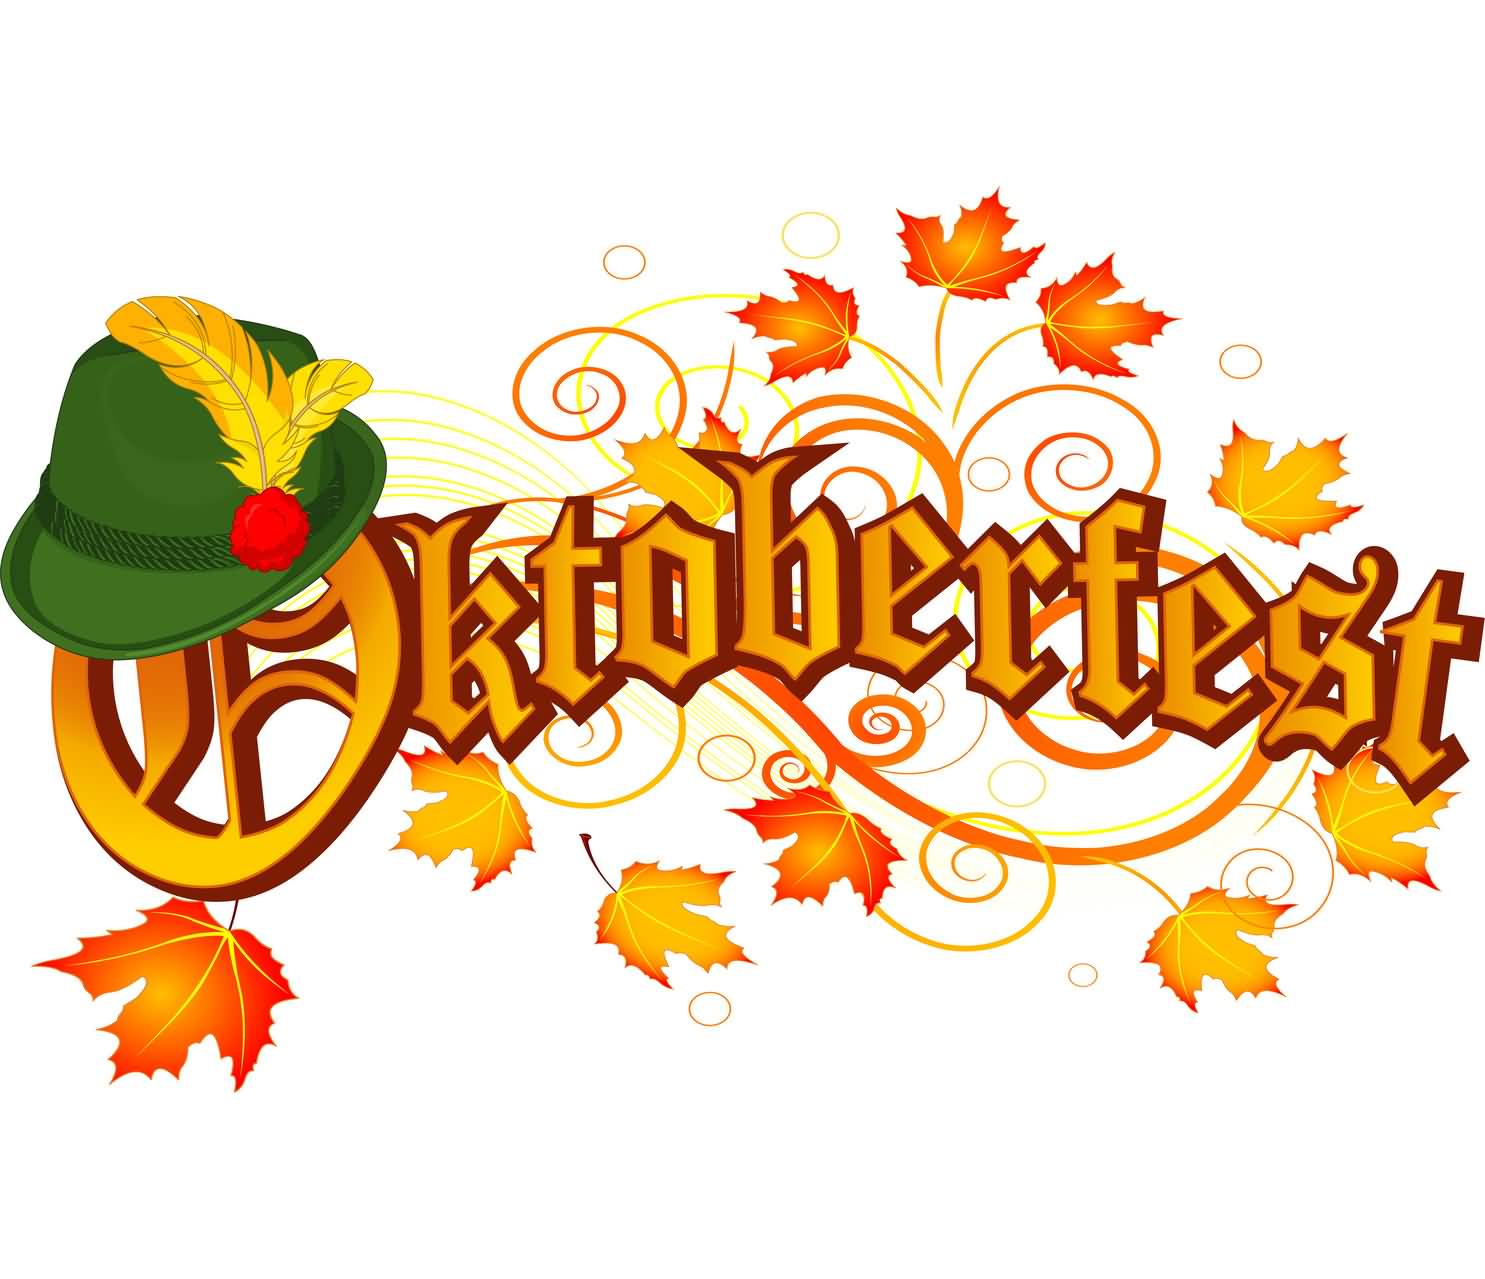 Oktoberfest Wishes With Autumn Leaves And Hat Picture